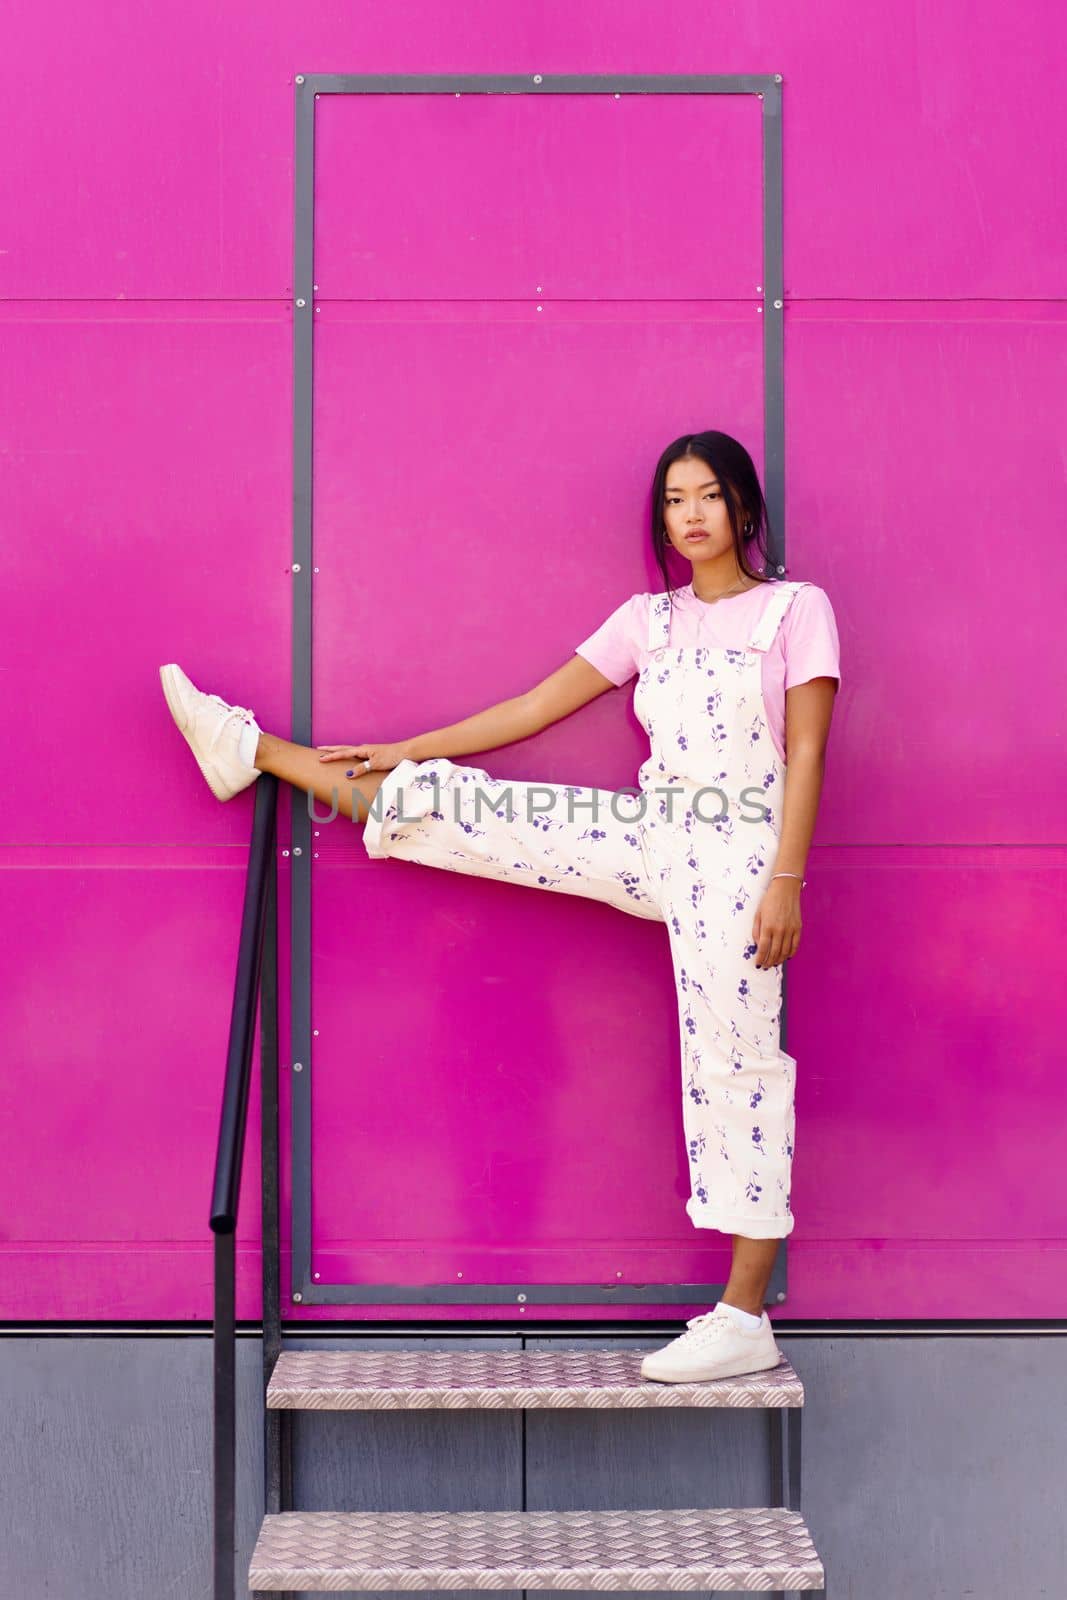 Asian woman looking at camera with serious expression, raising one leg over railing near pink wall. by javiindy